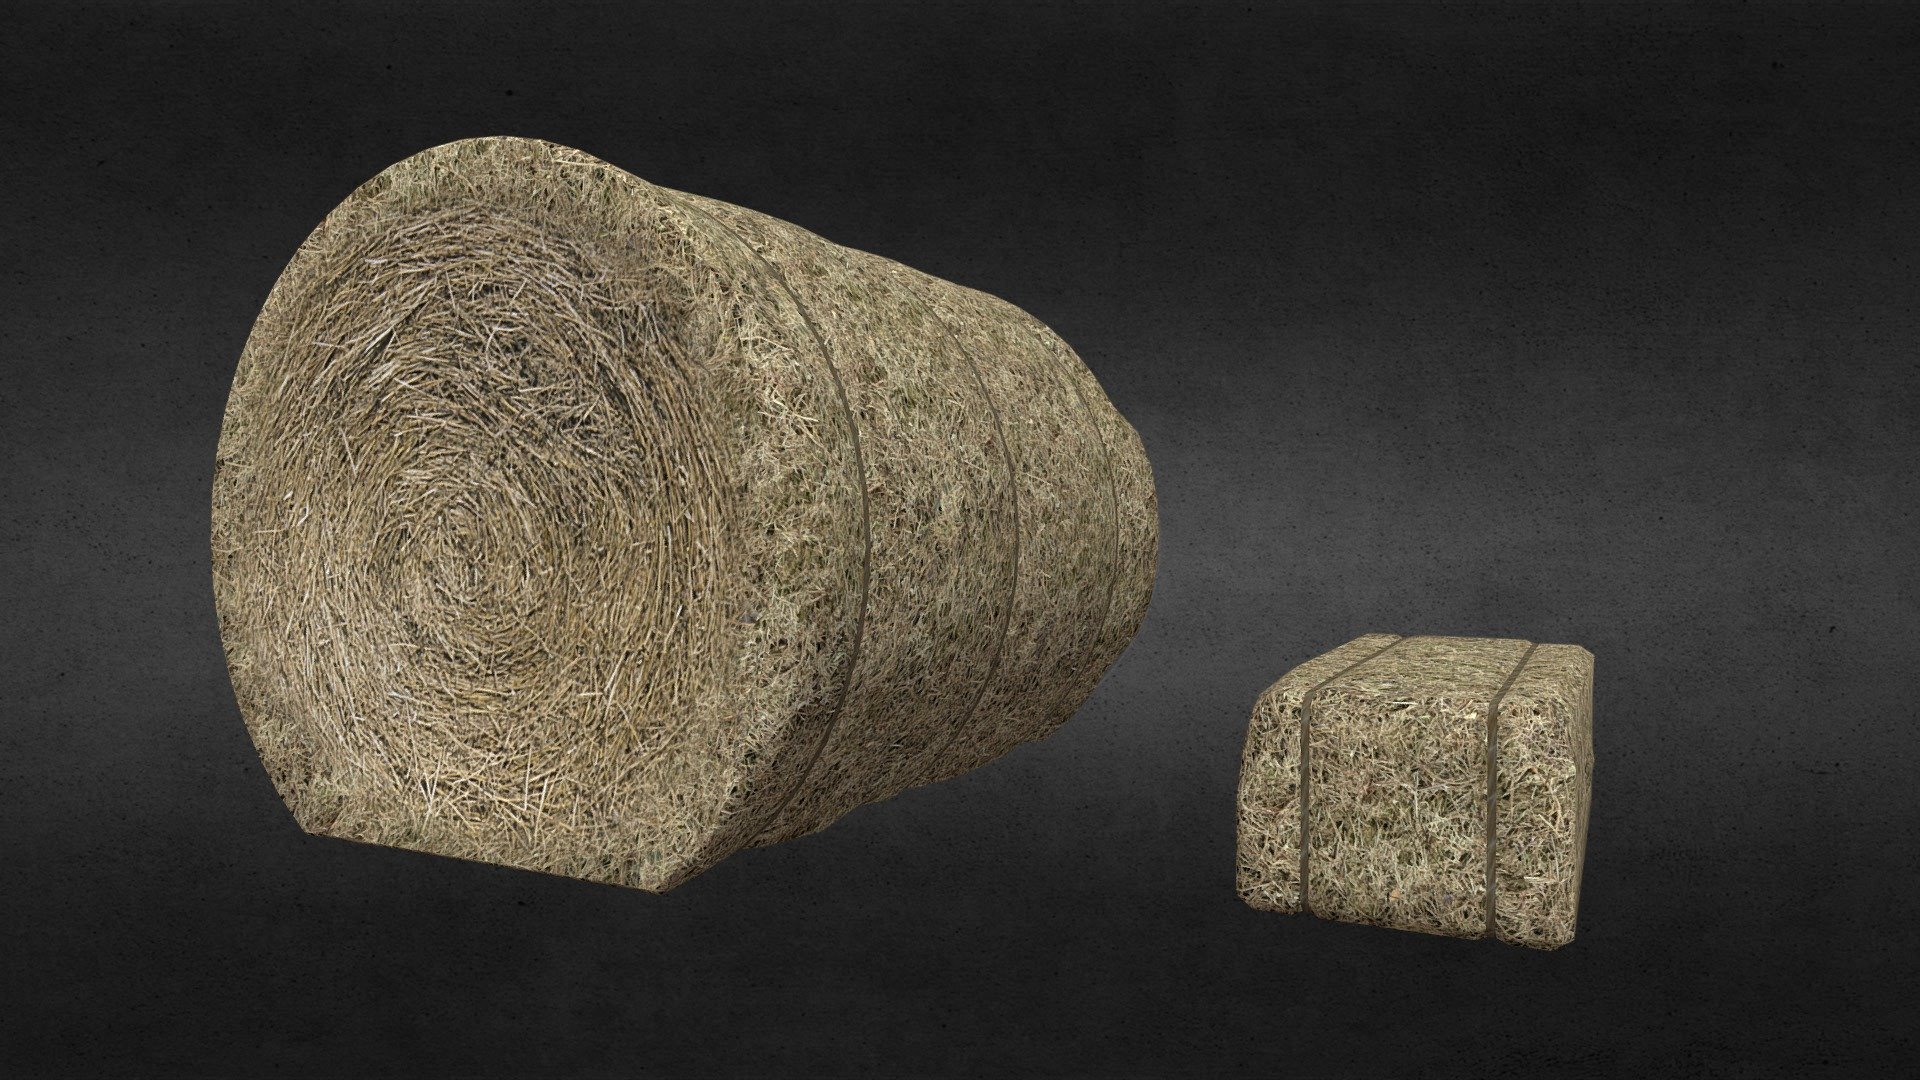 A low-poly set of hay bales that I created for an upcoming project, Shinrin-Yoku. Both objects use the same 2048 texture to help with batching in your game engine. Feel free to use these models in anyway you wish, just don't claim ownership.

Credit is not required, but is appreciated.

Follow me on Facebook, Instagram, or SketchFab to support me and keep up with future game releases 3d model